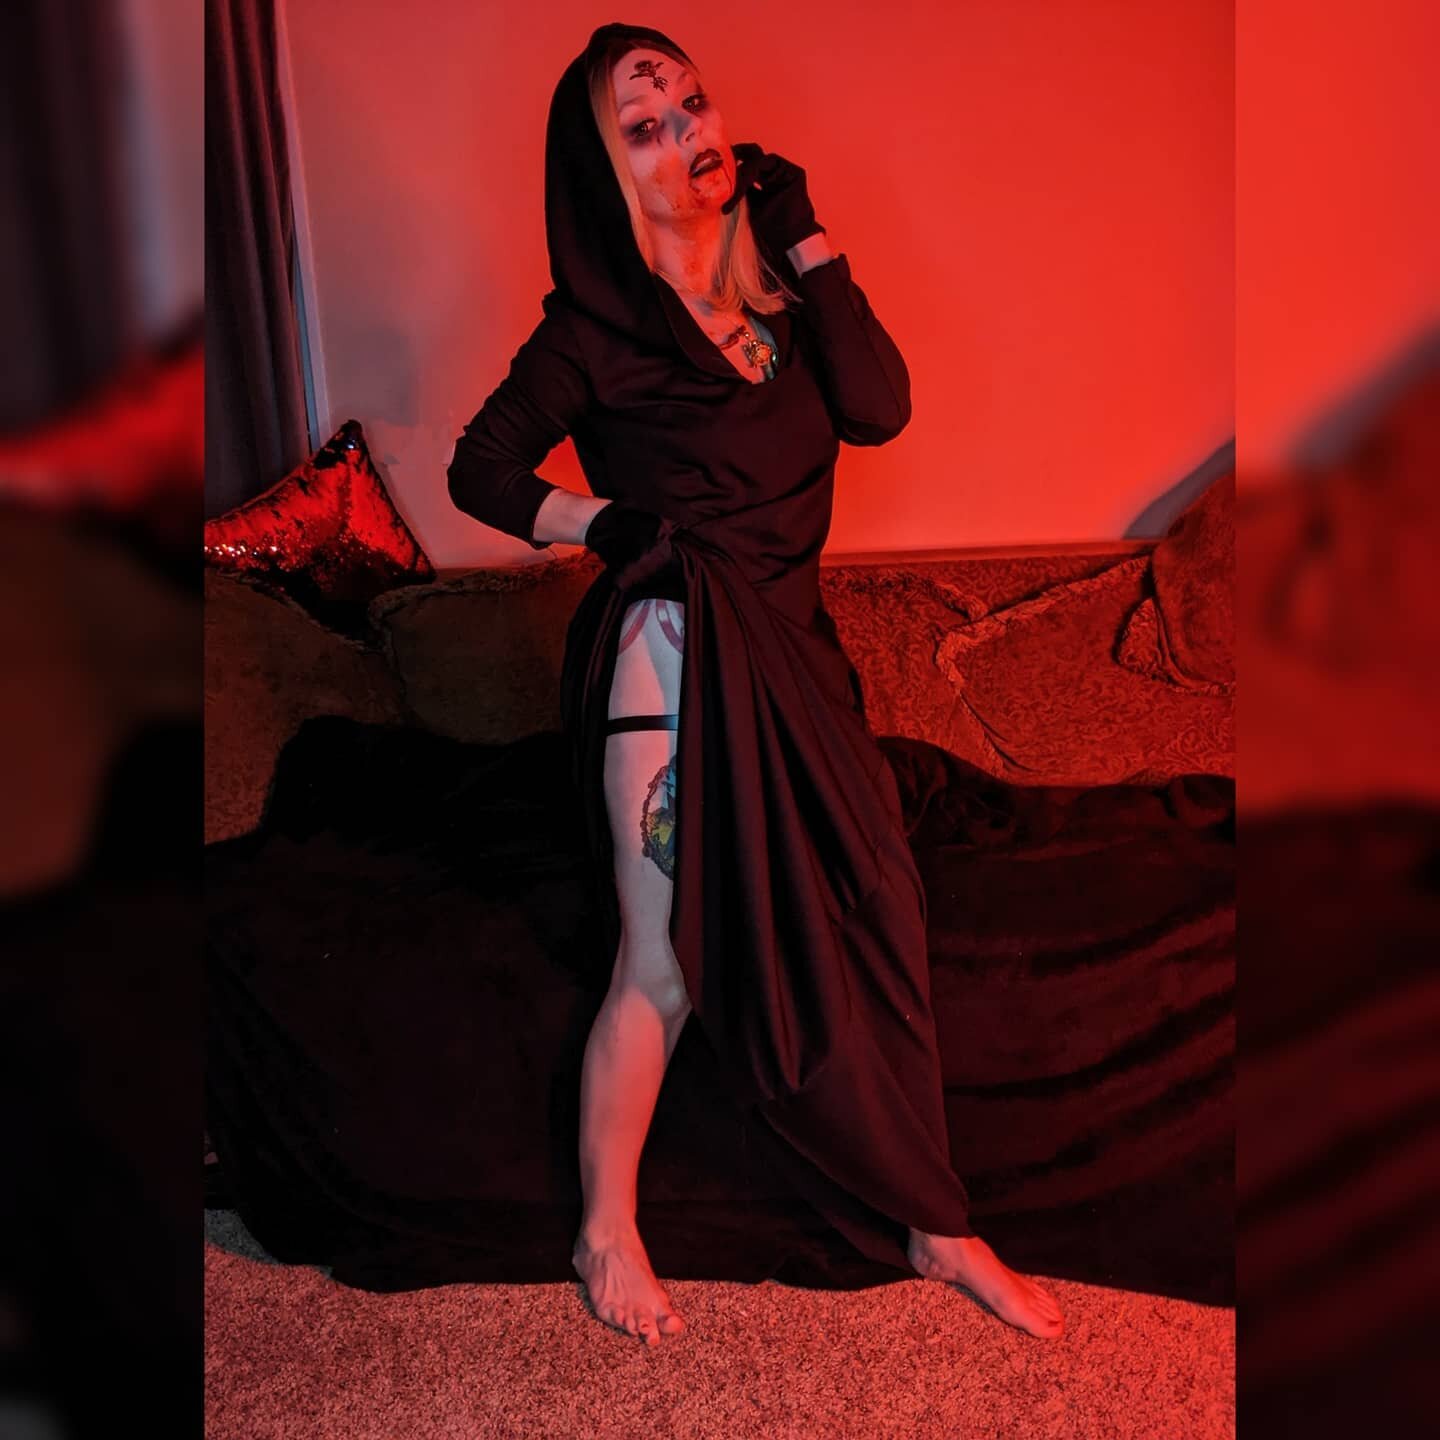 Did I drop a Resident Evil OF set... Yes... Yes I did. Check the link in my bio!
*
*
*
*
*
*
*
*
*
#cosplay #cosplayer #residentevil #residentevilvillage #scareactor #hauntscene #hauntactor #scary #spooky #vampire #vampirecosplay #ladydimitrescu #re8